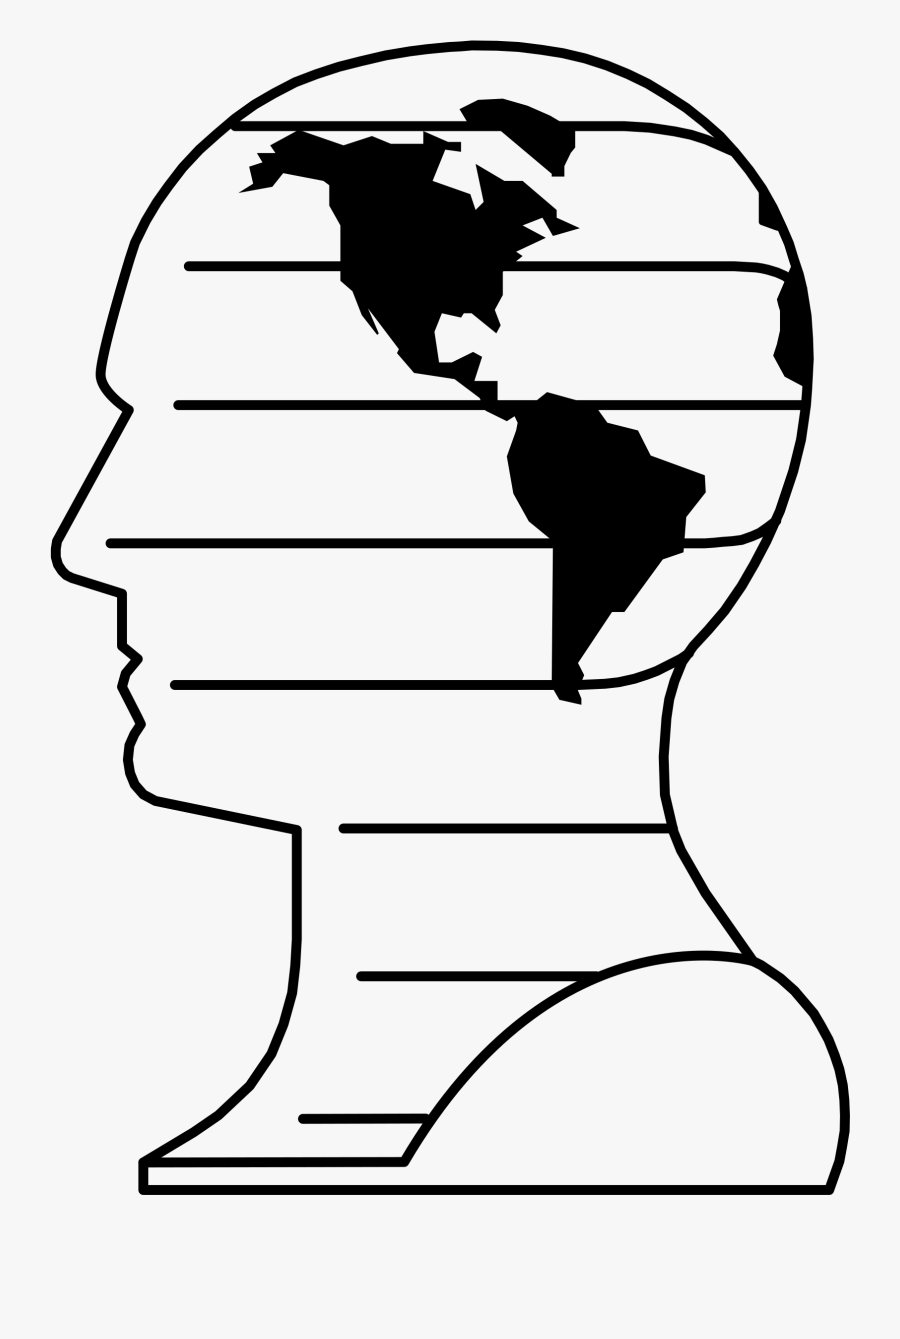 Mind Clipart Black And White - High Resolution World Map Vector, Transparent Clipart